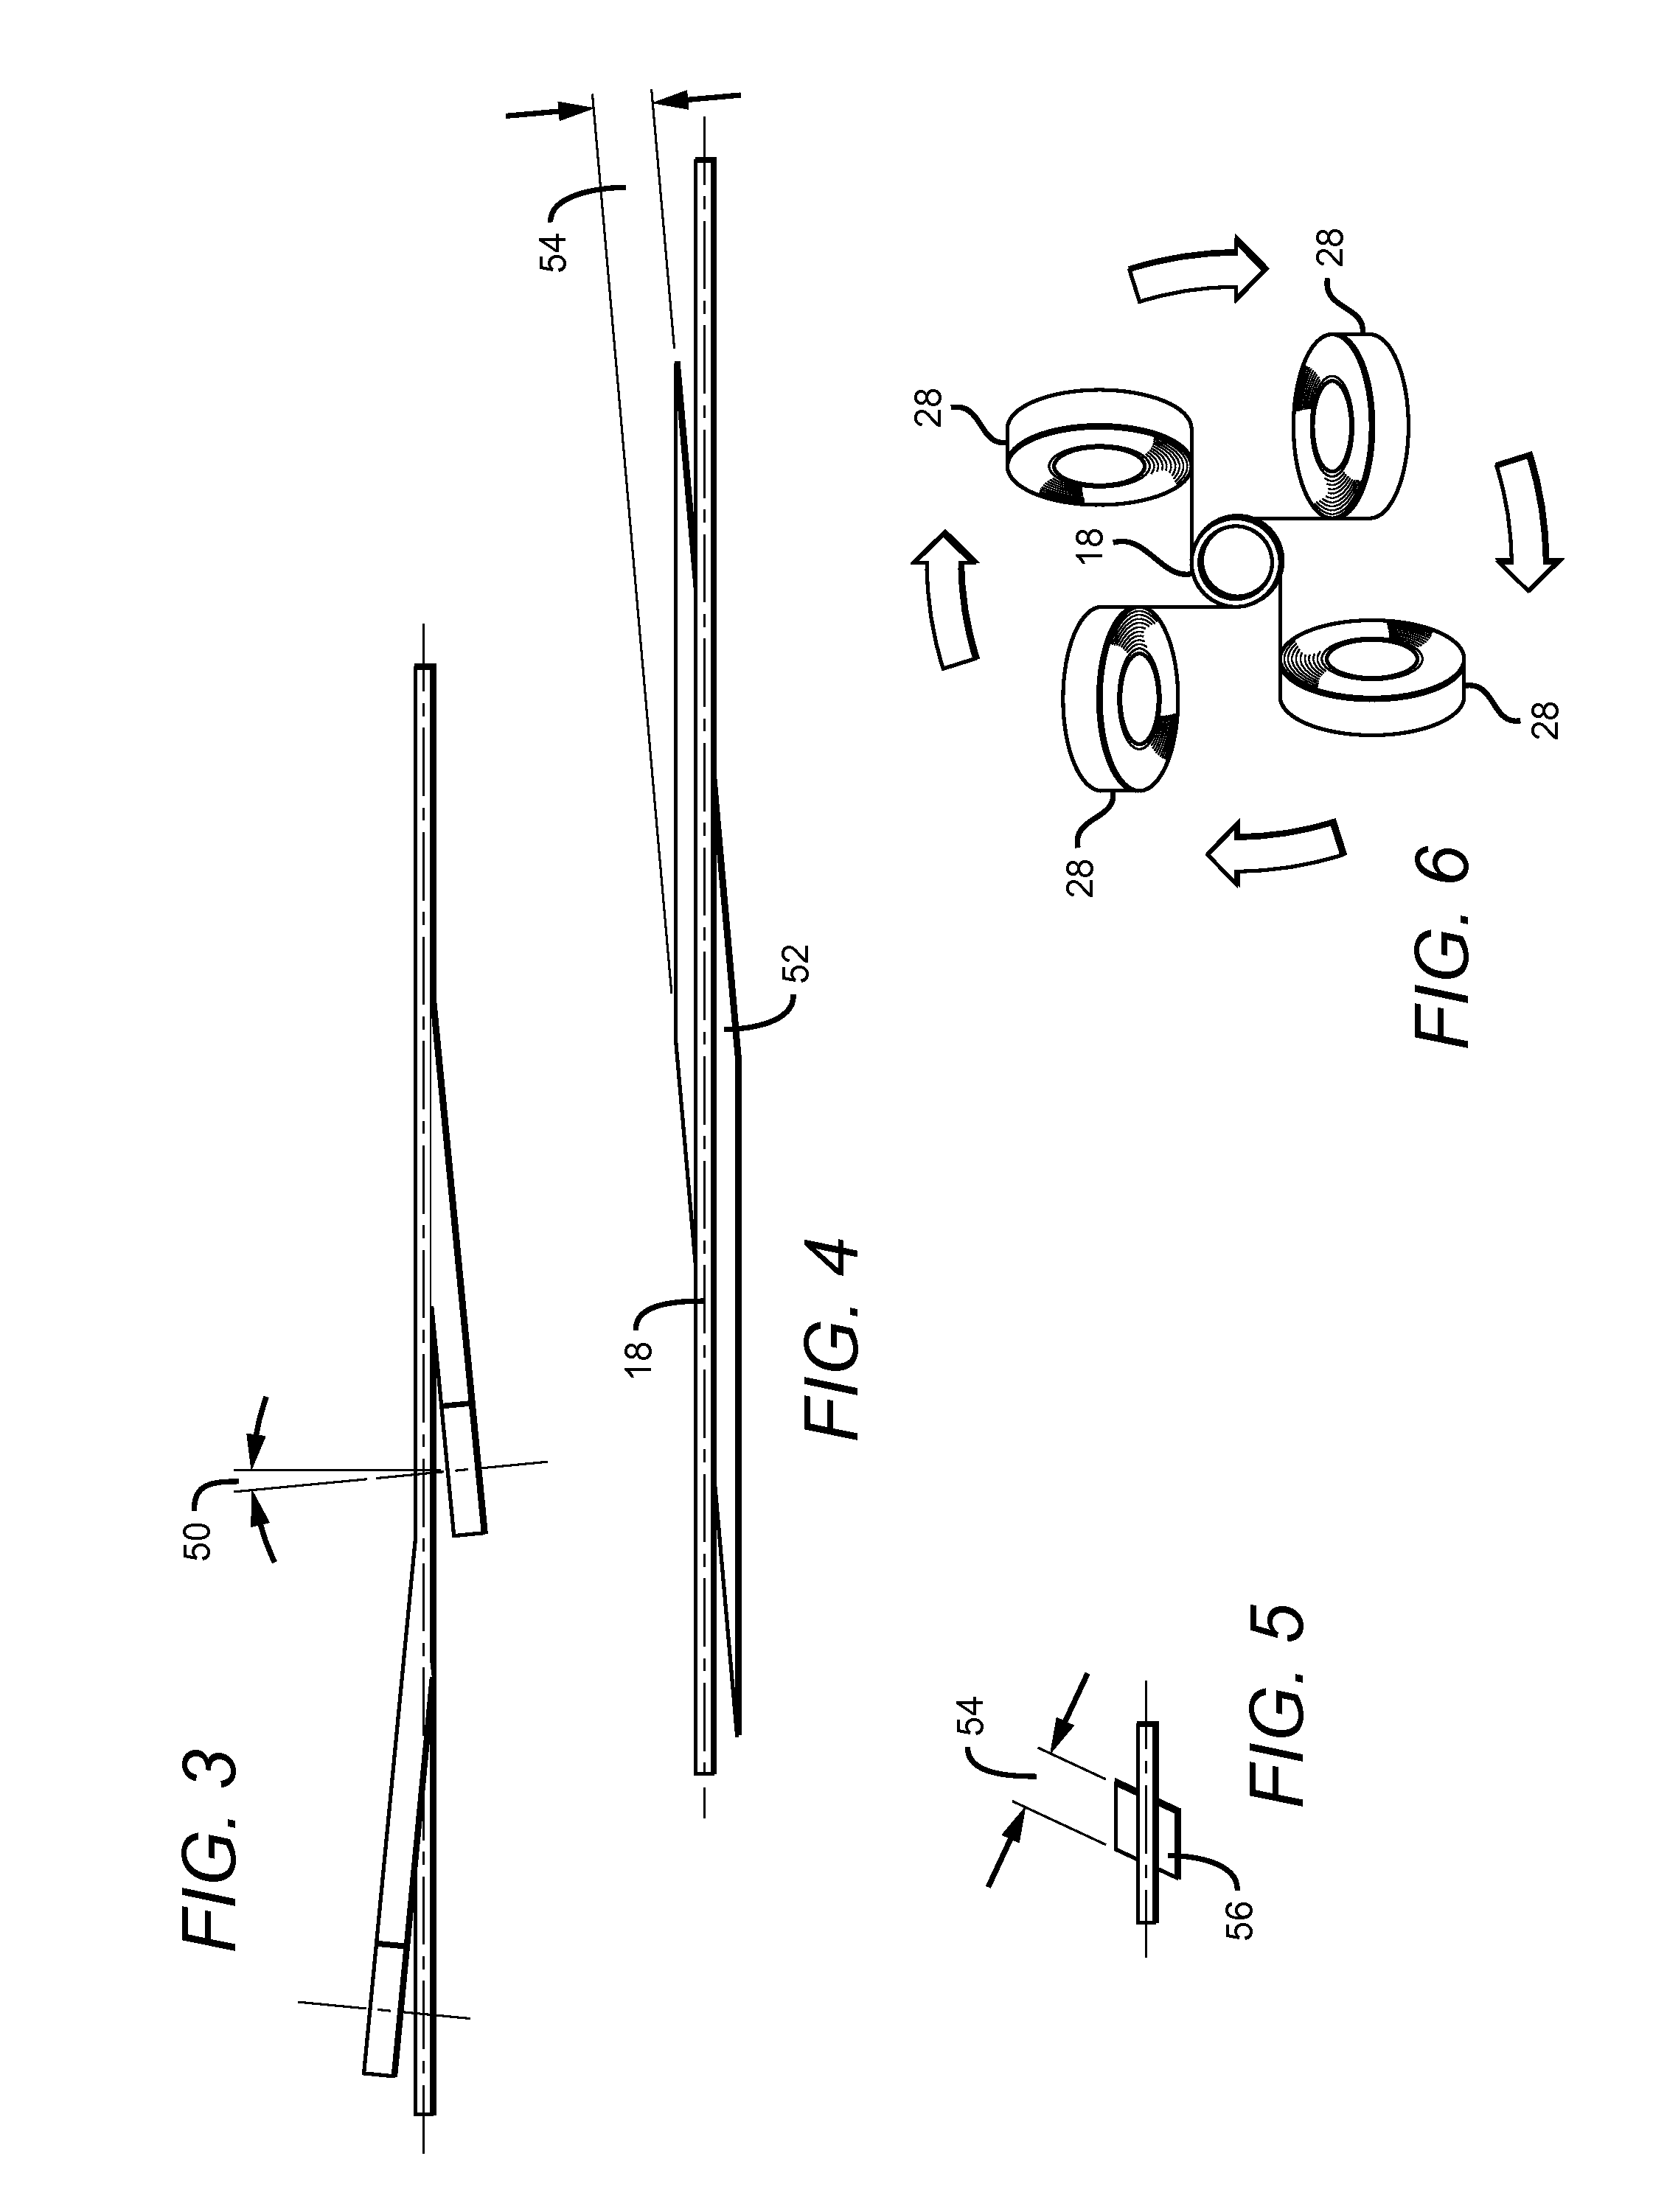 Method and Apparatus for Producing Off-Axis Composite Prepreg Material